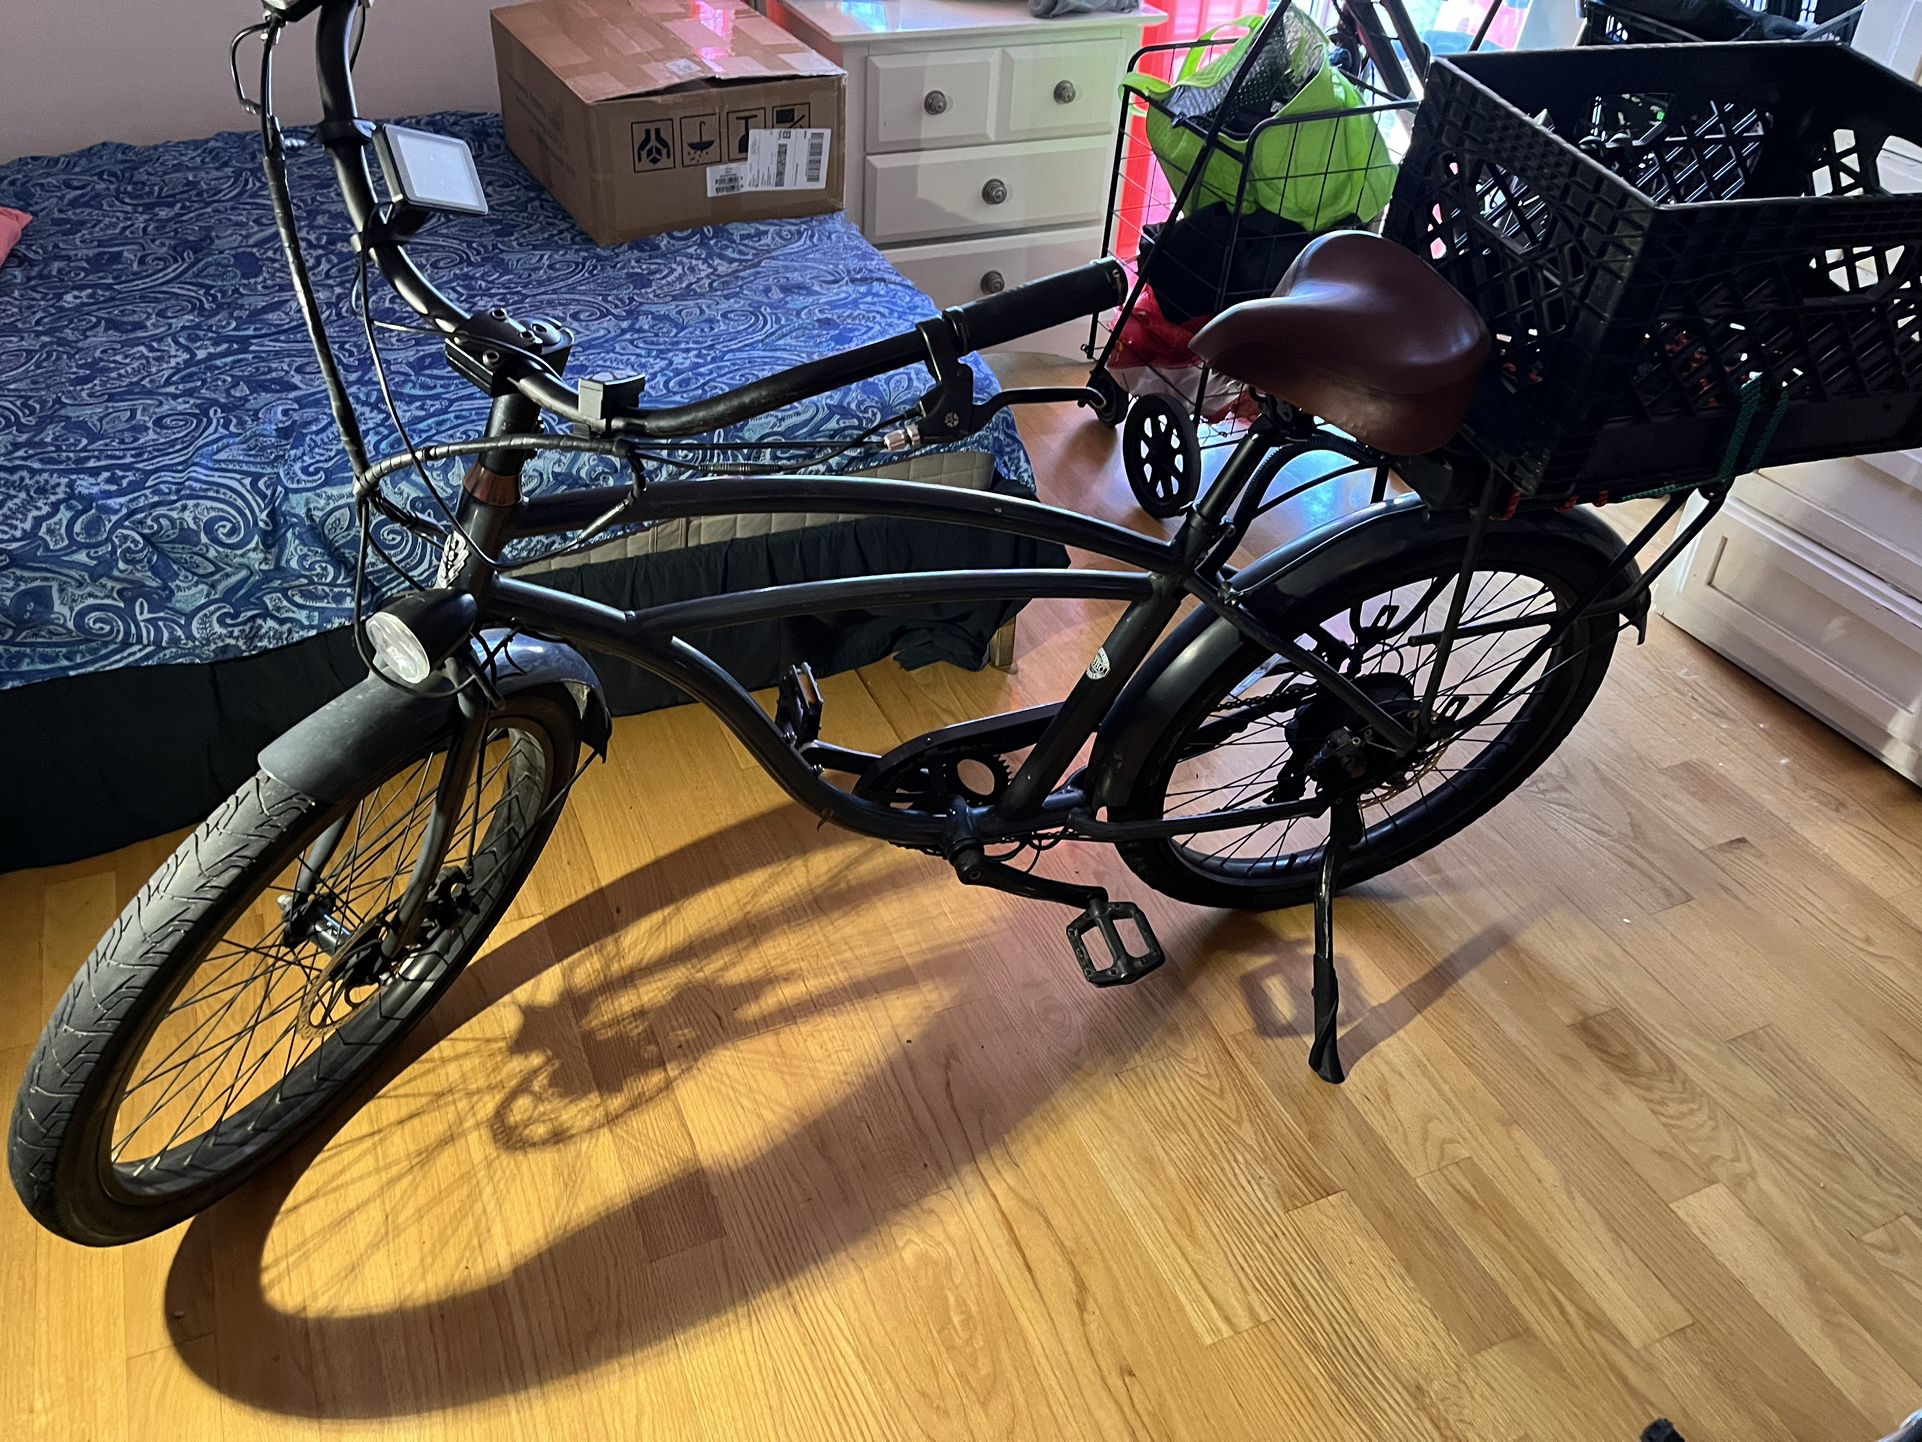 3 Electric Bicycles 